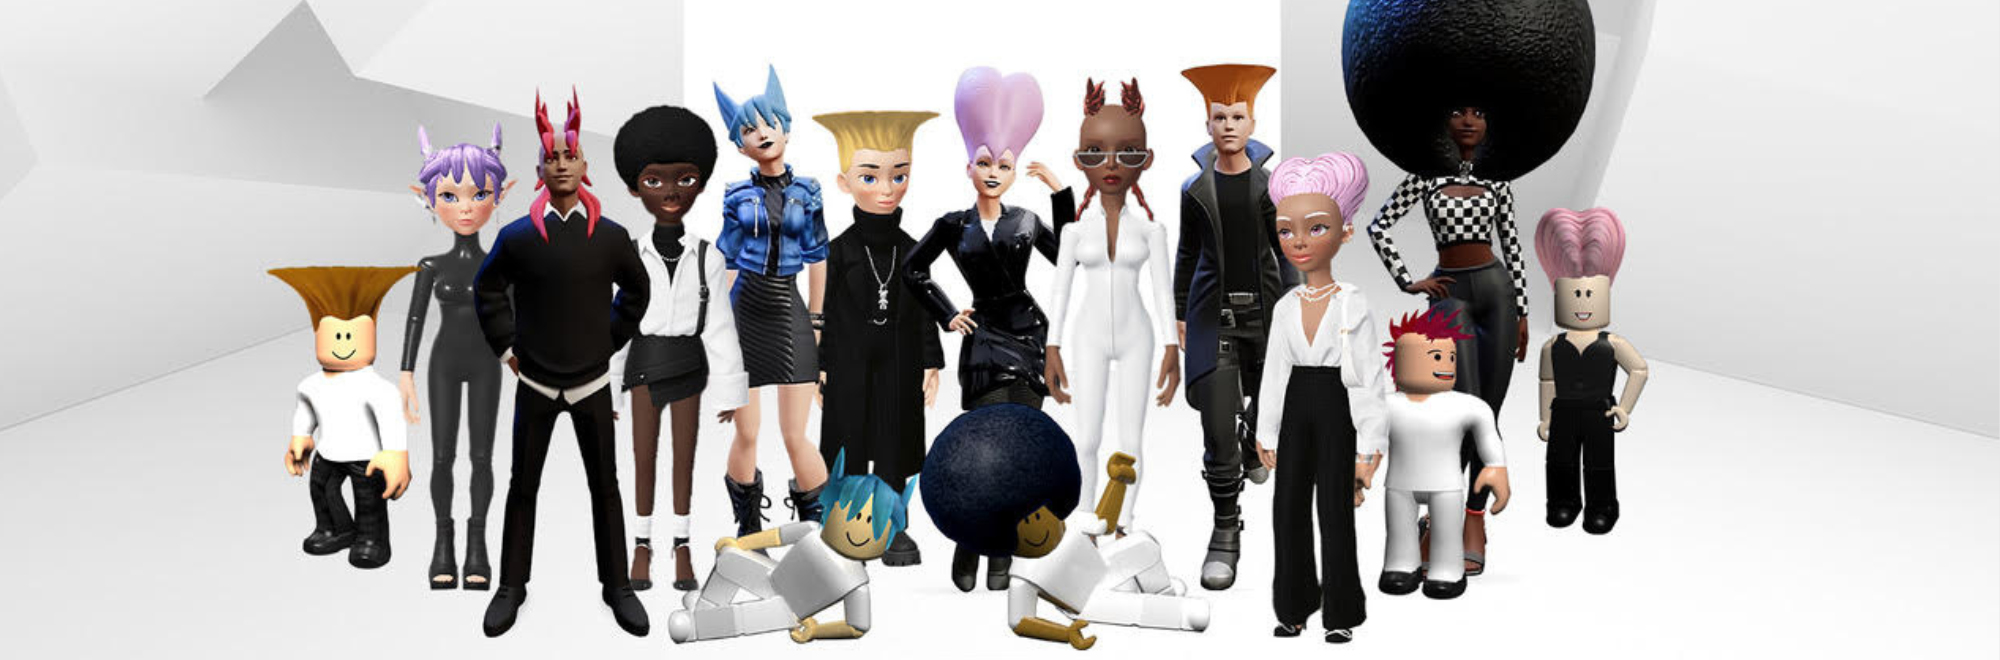 L’Oréal Professionnel creates avatars with inspired hairstyles for brand expression in the metaverse